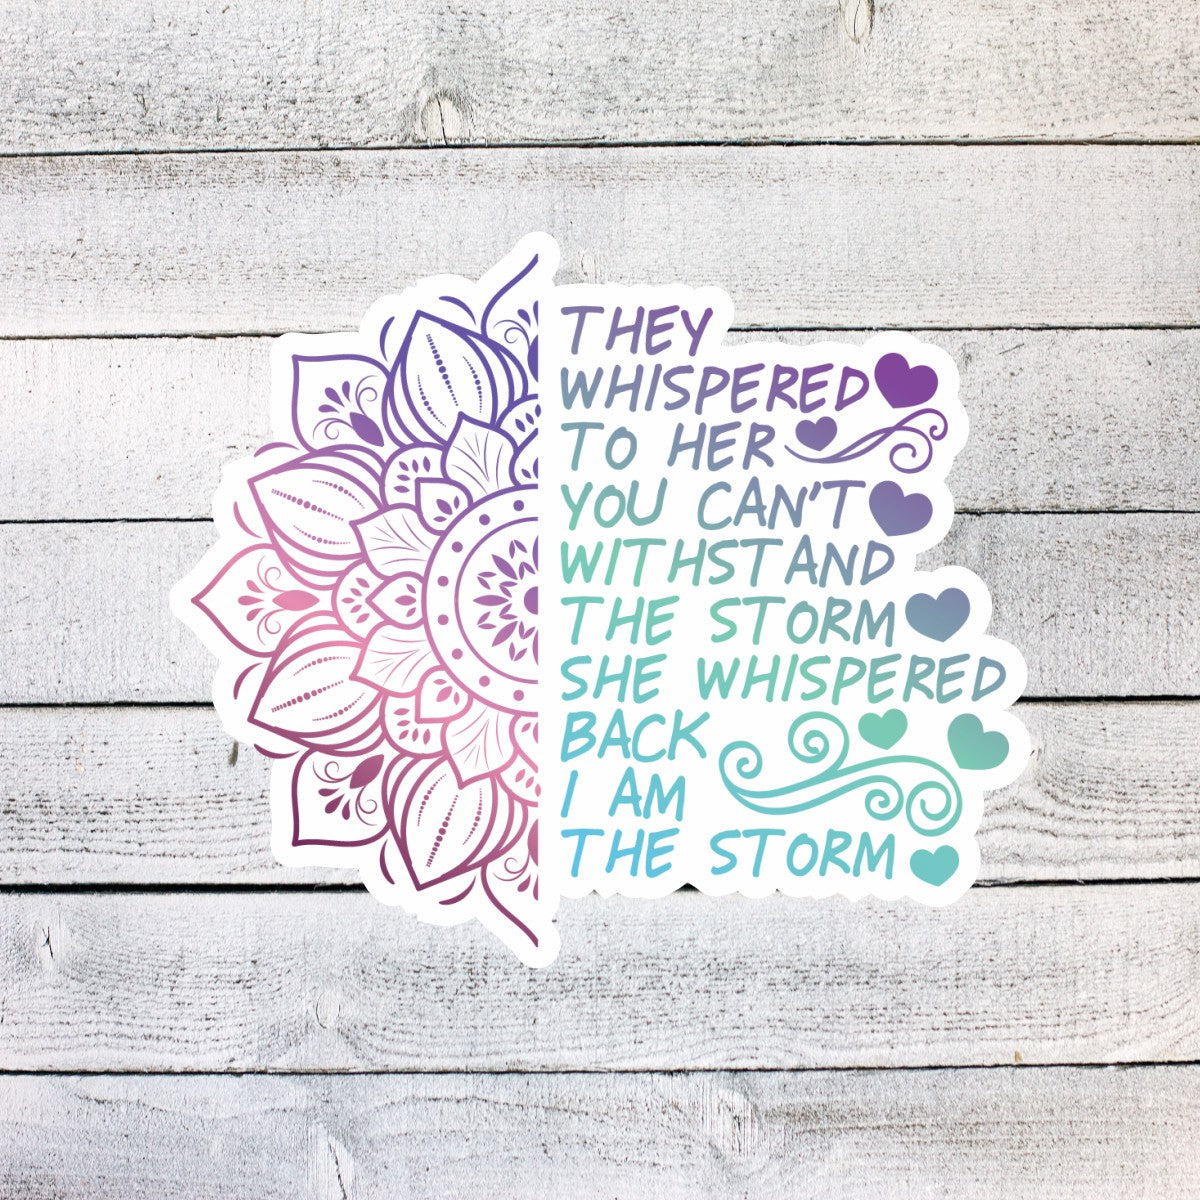 They Whispered to her you can't withstand the storm, and she whispered back, I am the Storm Sticker